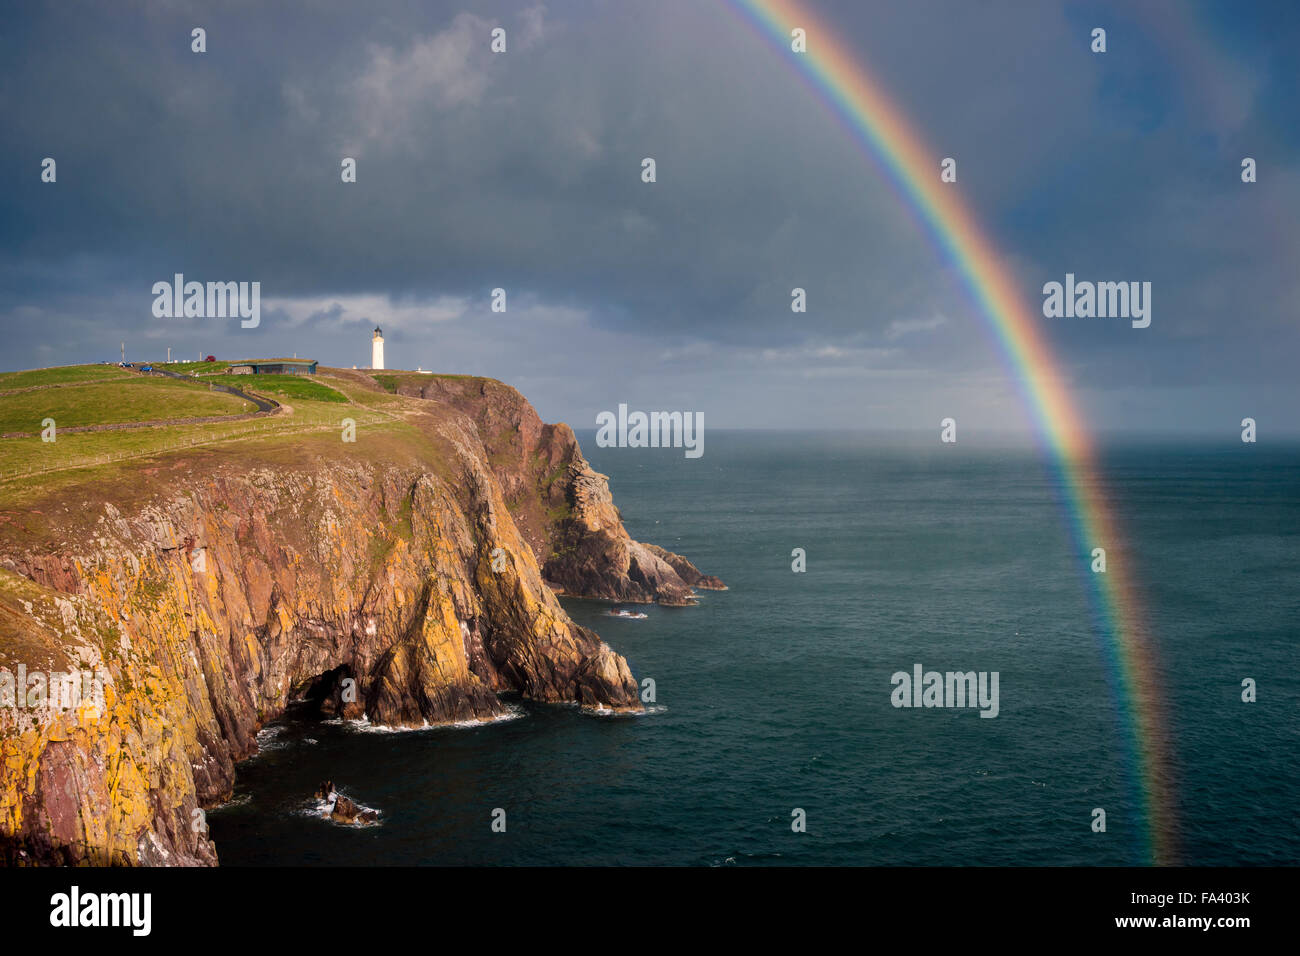 Rainbow Over Mull of Galloway lighthouse, Dumfries and Galloway, Scotland, Regno Unito Foto Stock